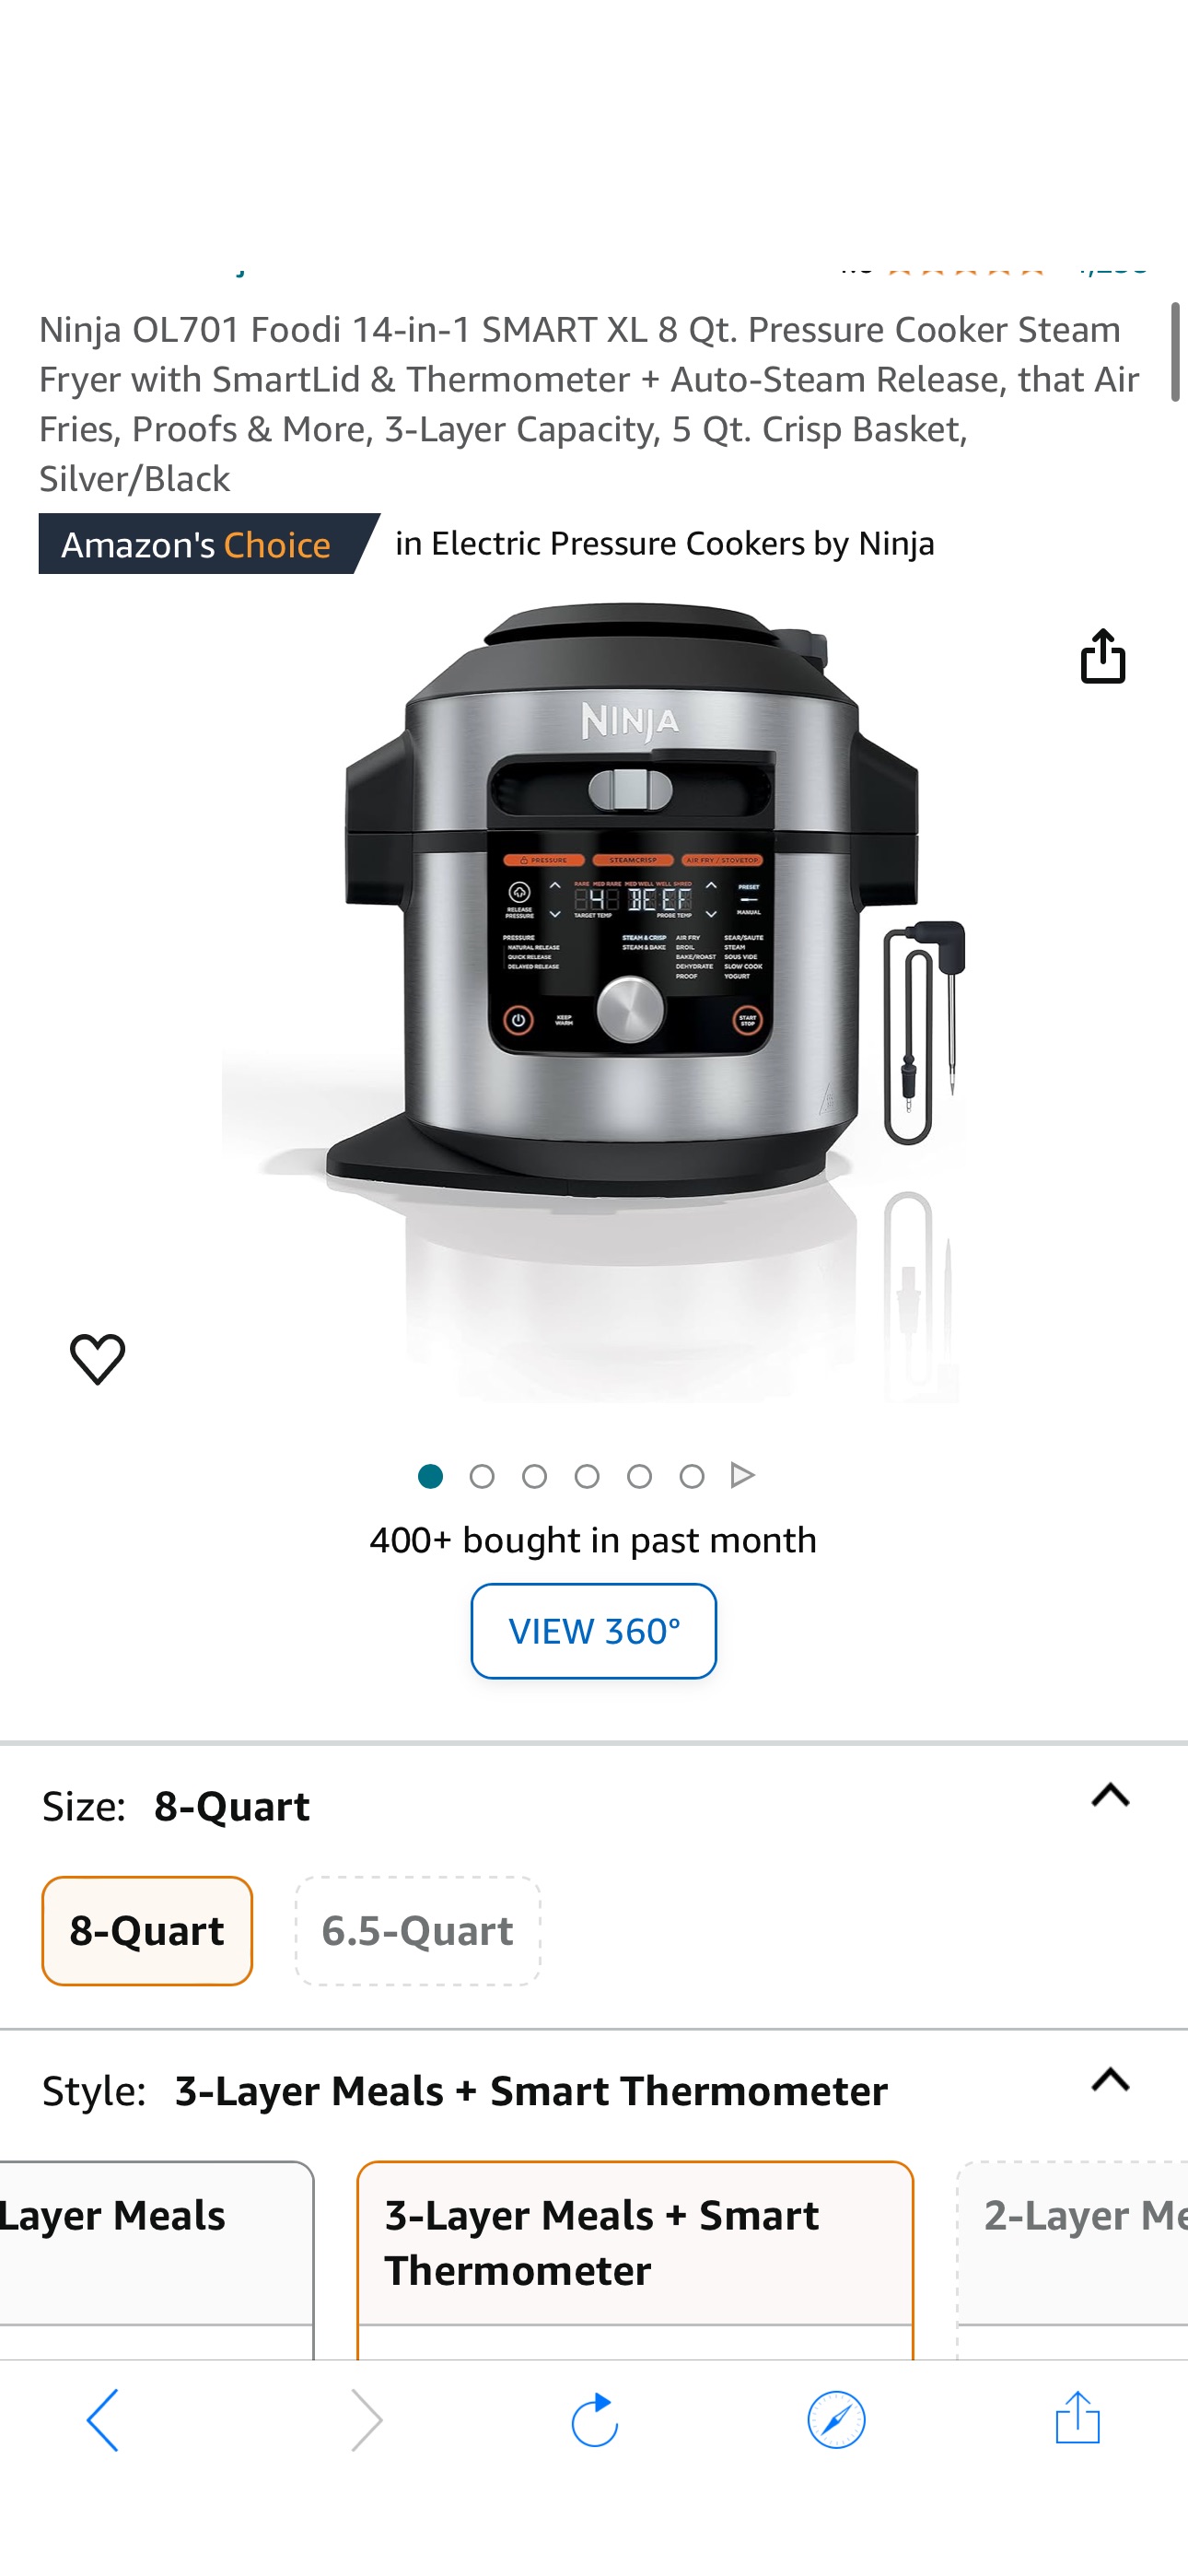 Amazon.com: Ninja OL500 Foodi 6.5 Qt. 14-in-1 Pressure Cooker Steam Fryer with SmartLid, that Air Fries, Proofs & More, with 2-Layer Capacity, 4.6 Qt. Crisp Plate & 25 Recipes, Silver/Black